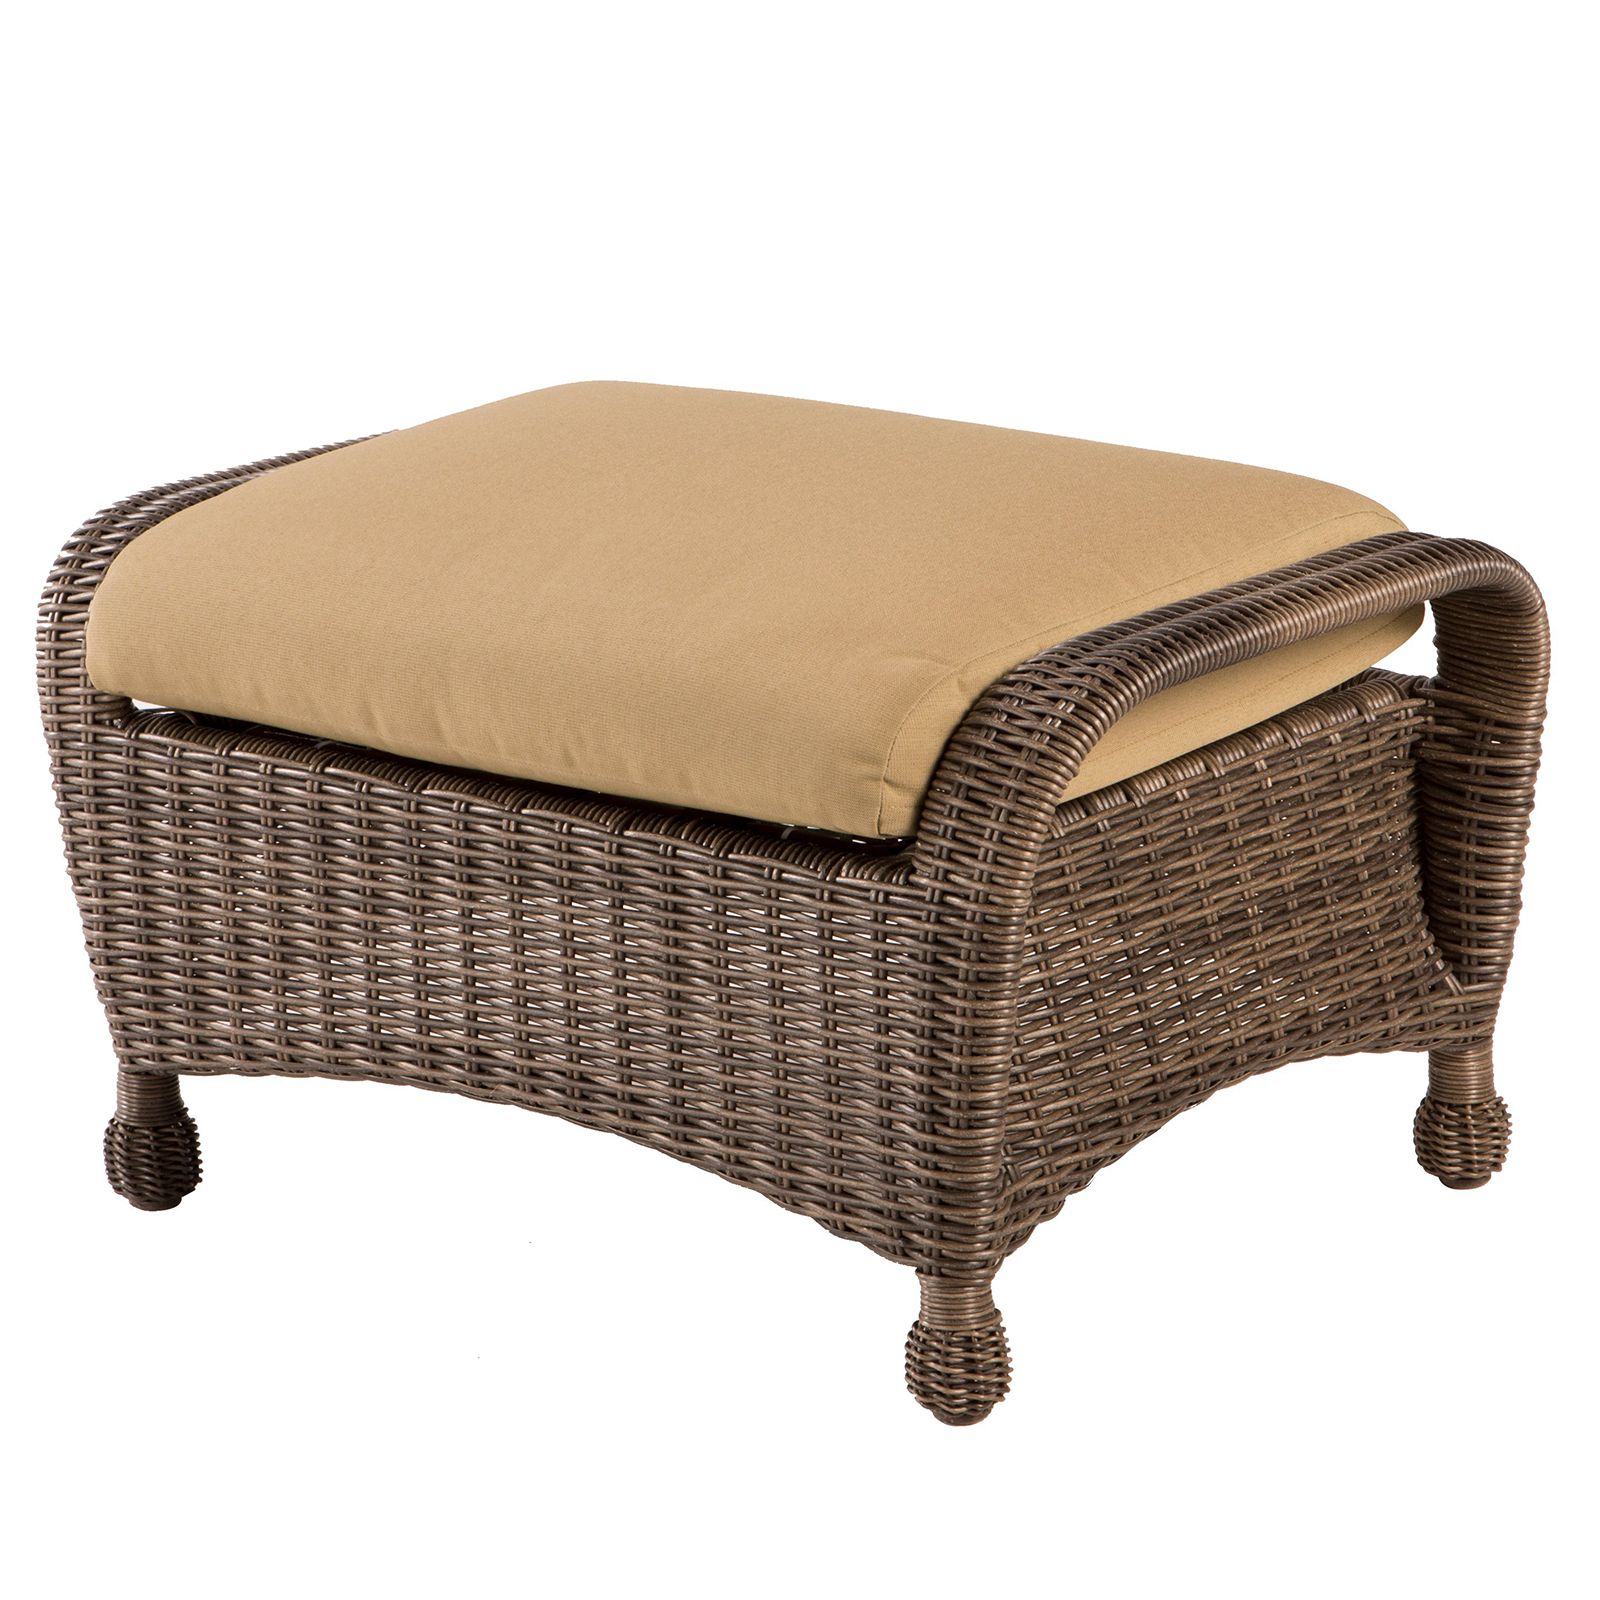 Well Known North Mowing All Weather Wicker Ottoman At Hayneedle Pertaining To Woven Pouf Ottomans (View 5 of 10)